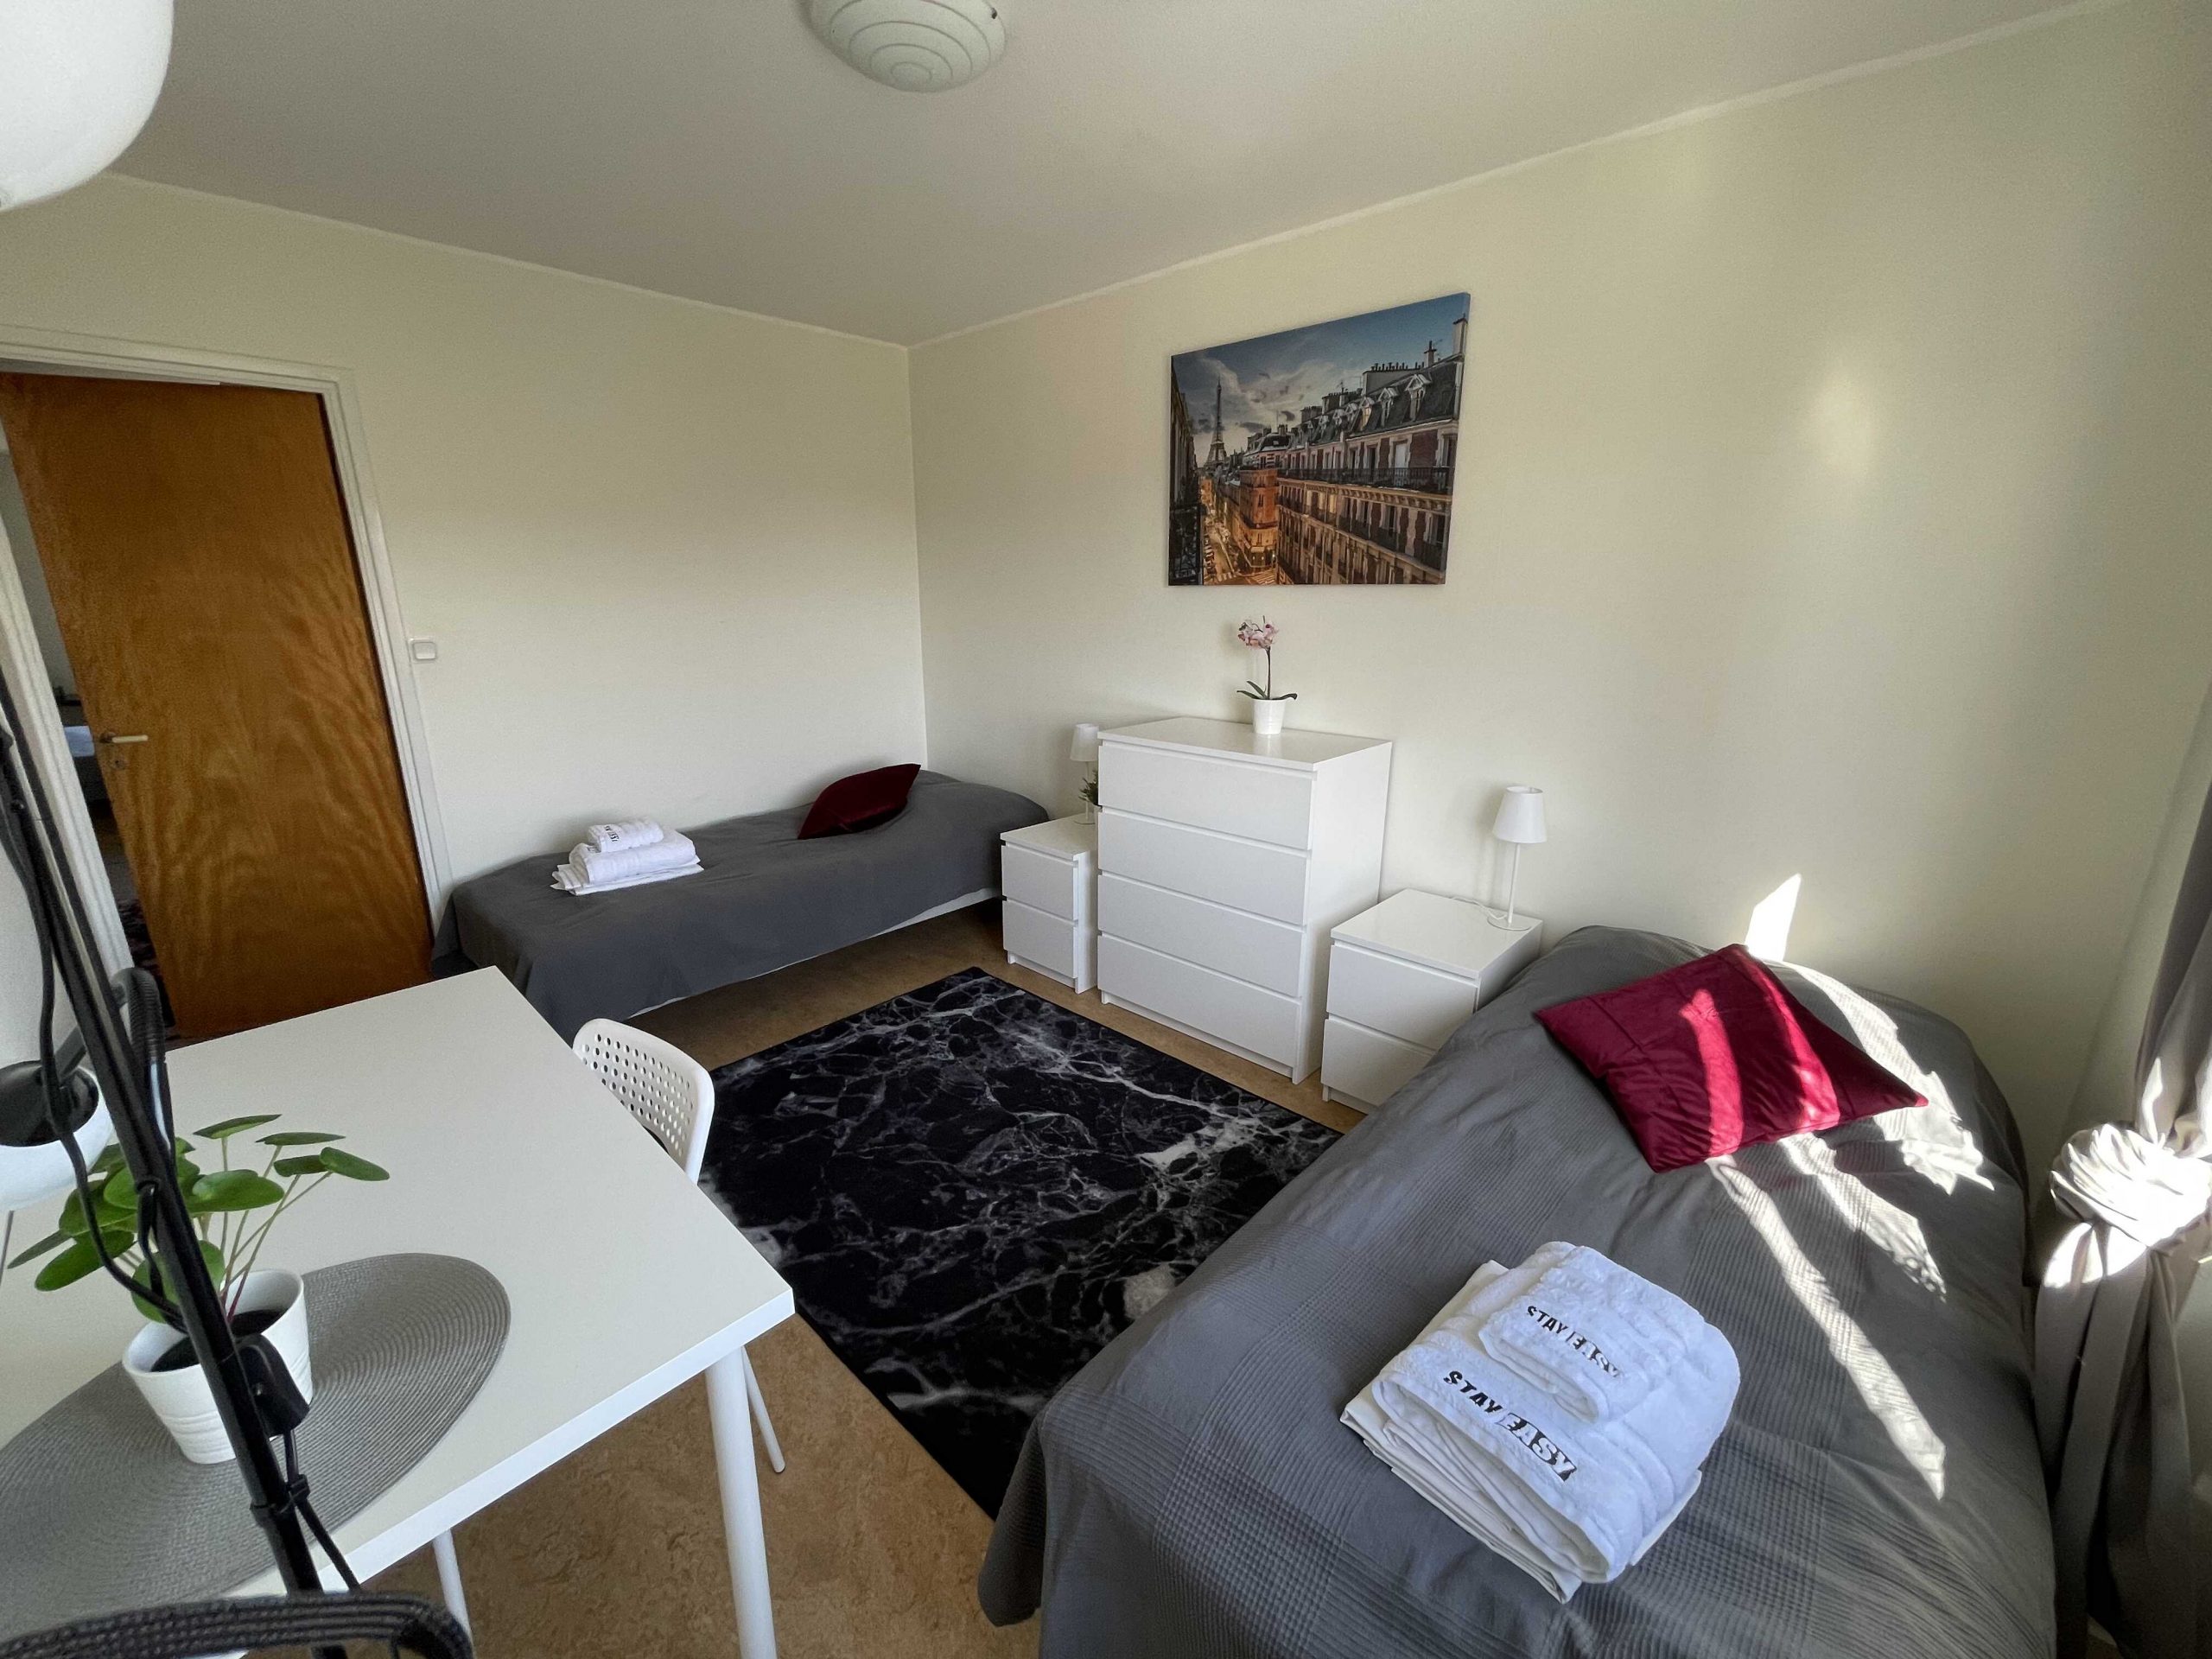 ﻿﻿﻿﻿Serviced apartment, business apartent, business accommodation